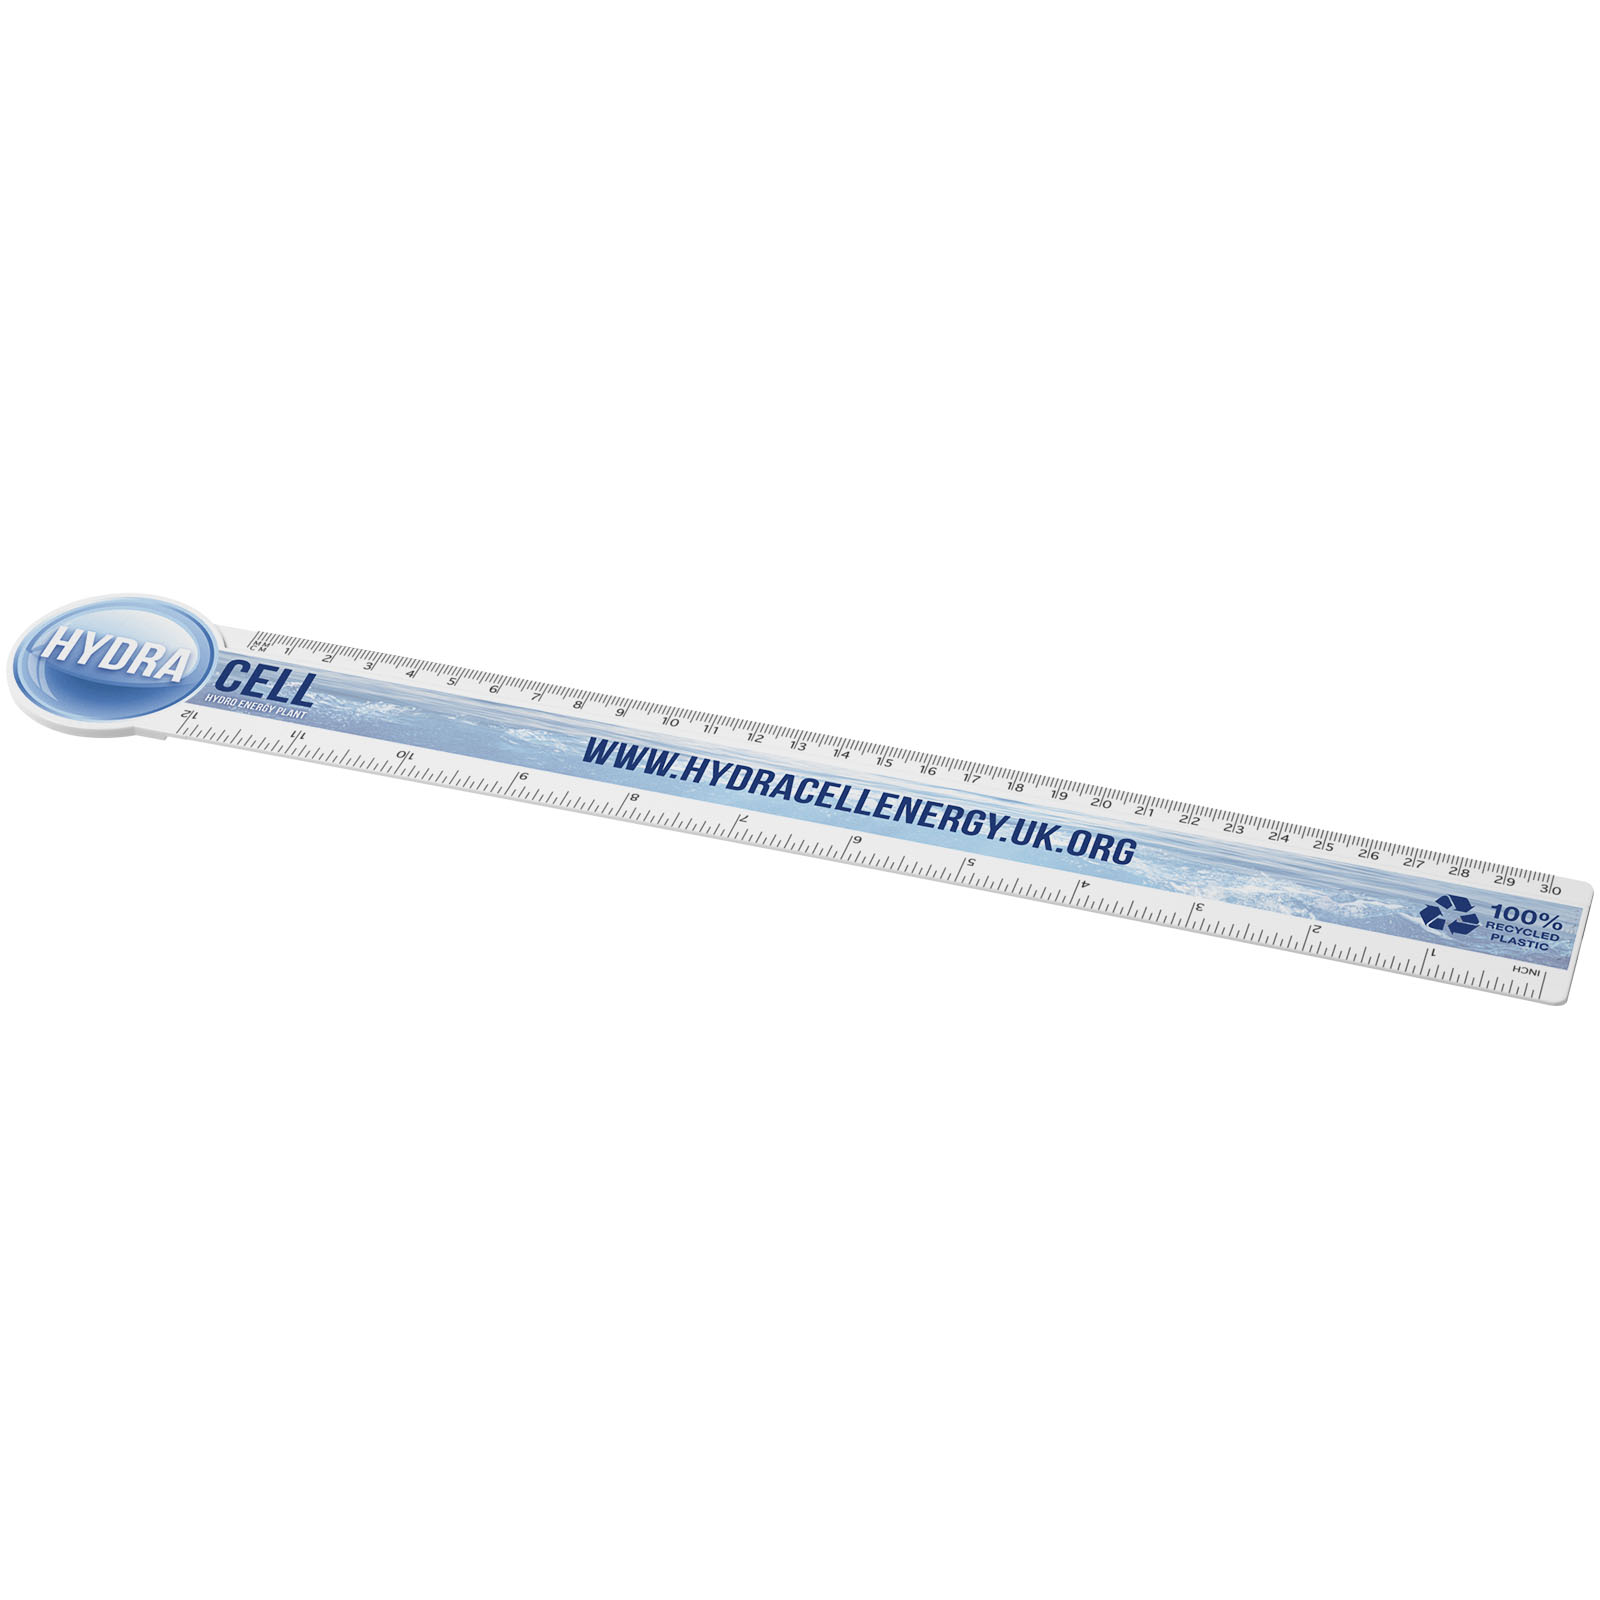 Advertising Desk Accessories - Tait 30cm circle-shaped recycled plastic ruler - 0